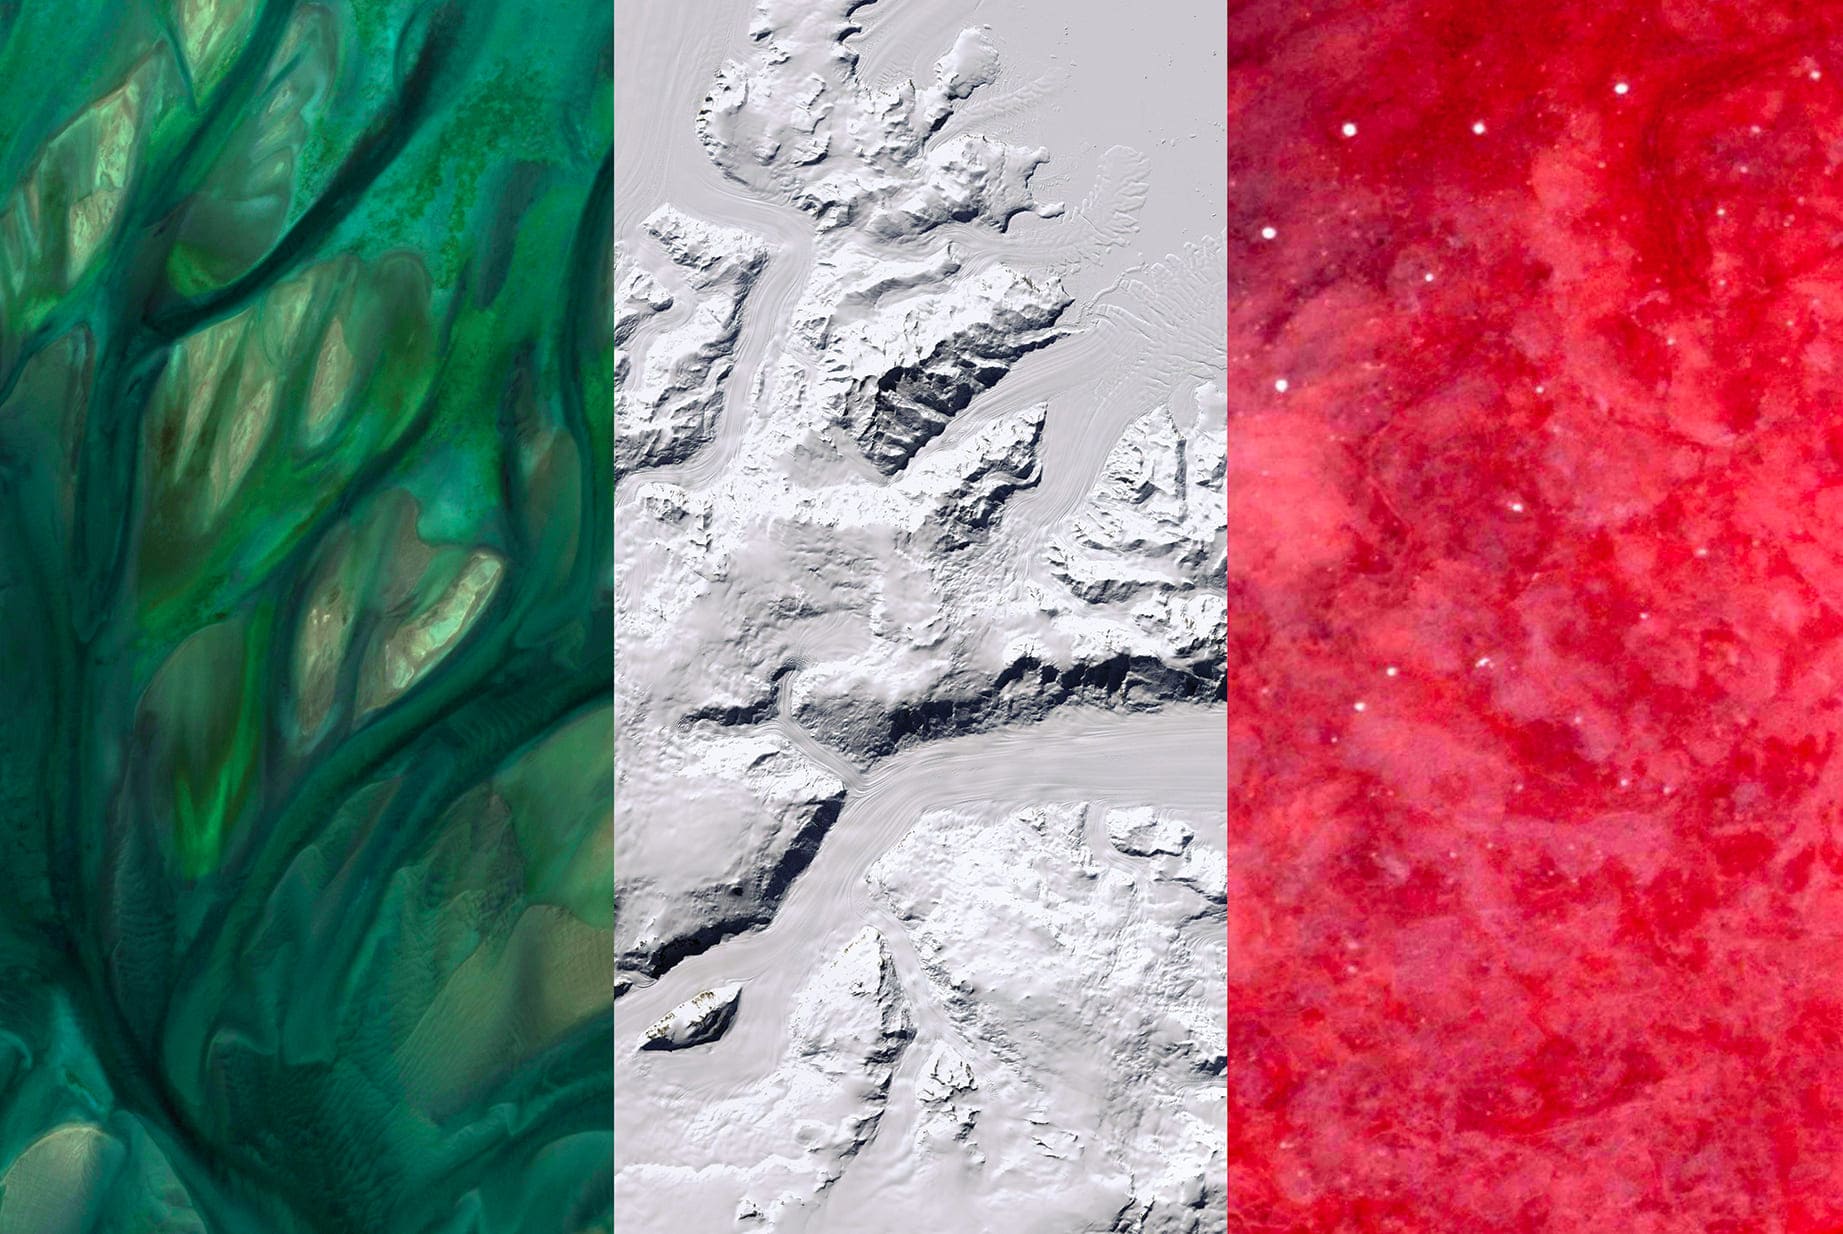 ITALY EARTH FLAG, 2016, DIGITAL COLLAGE OF SATELLITE PHOTOGRAPHY FROM QATAR, ANTARCTICA, NAMIBIA, diasec print CM 67×100, limited edition 9